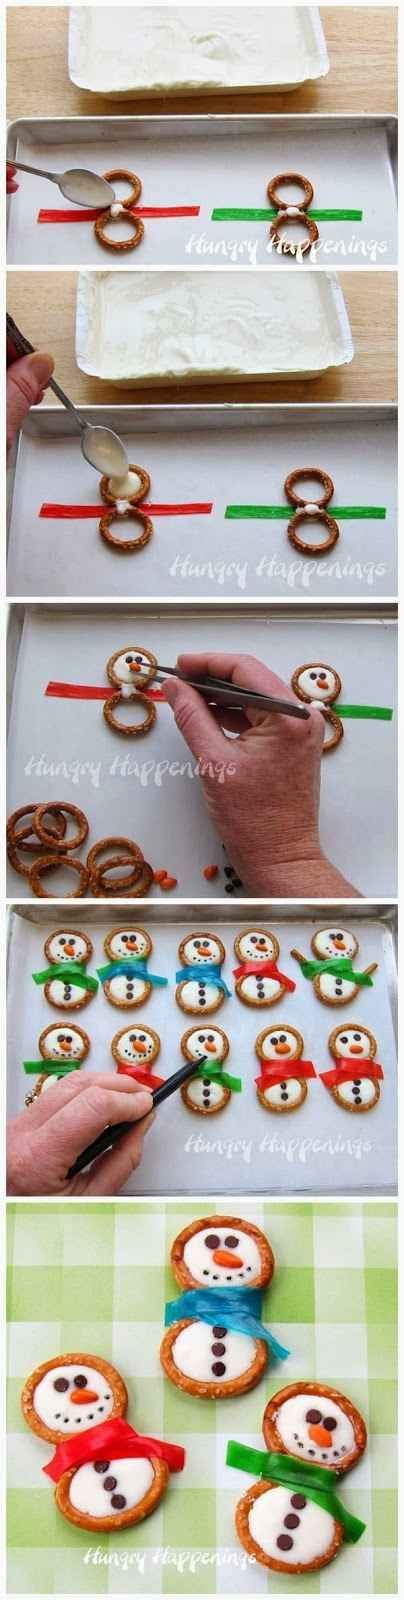 Pretzel rings, Fruit Roll-Ups, and frosting are an easy way to make delicious sn